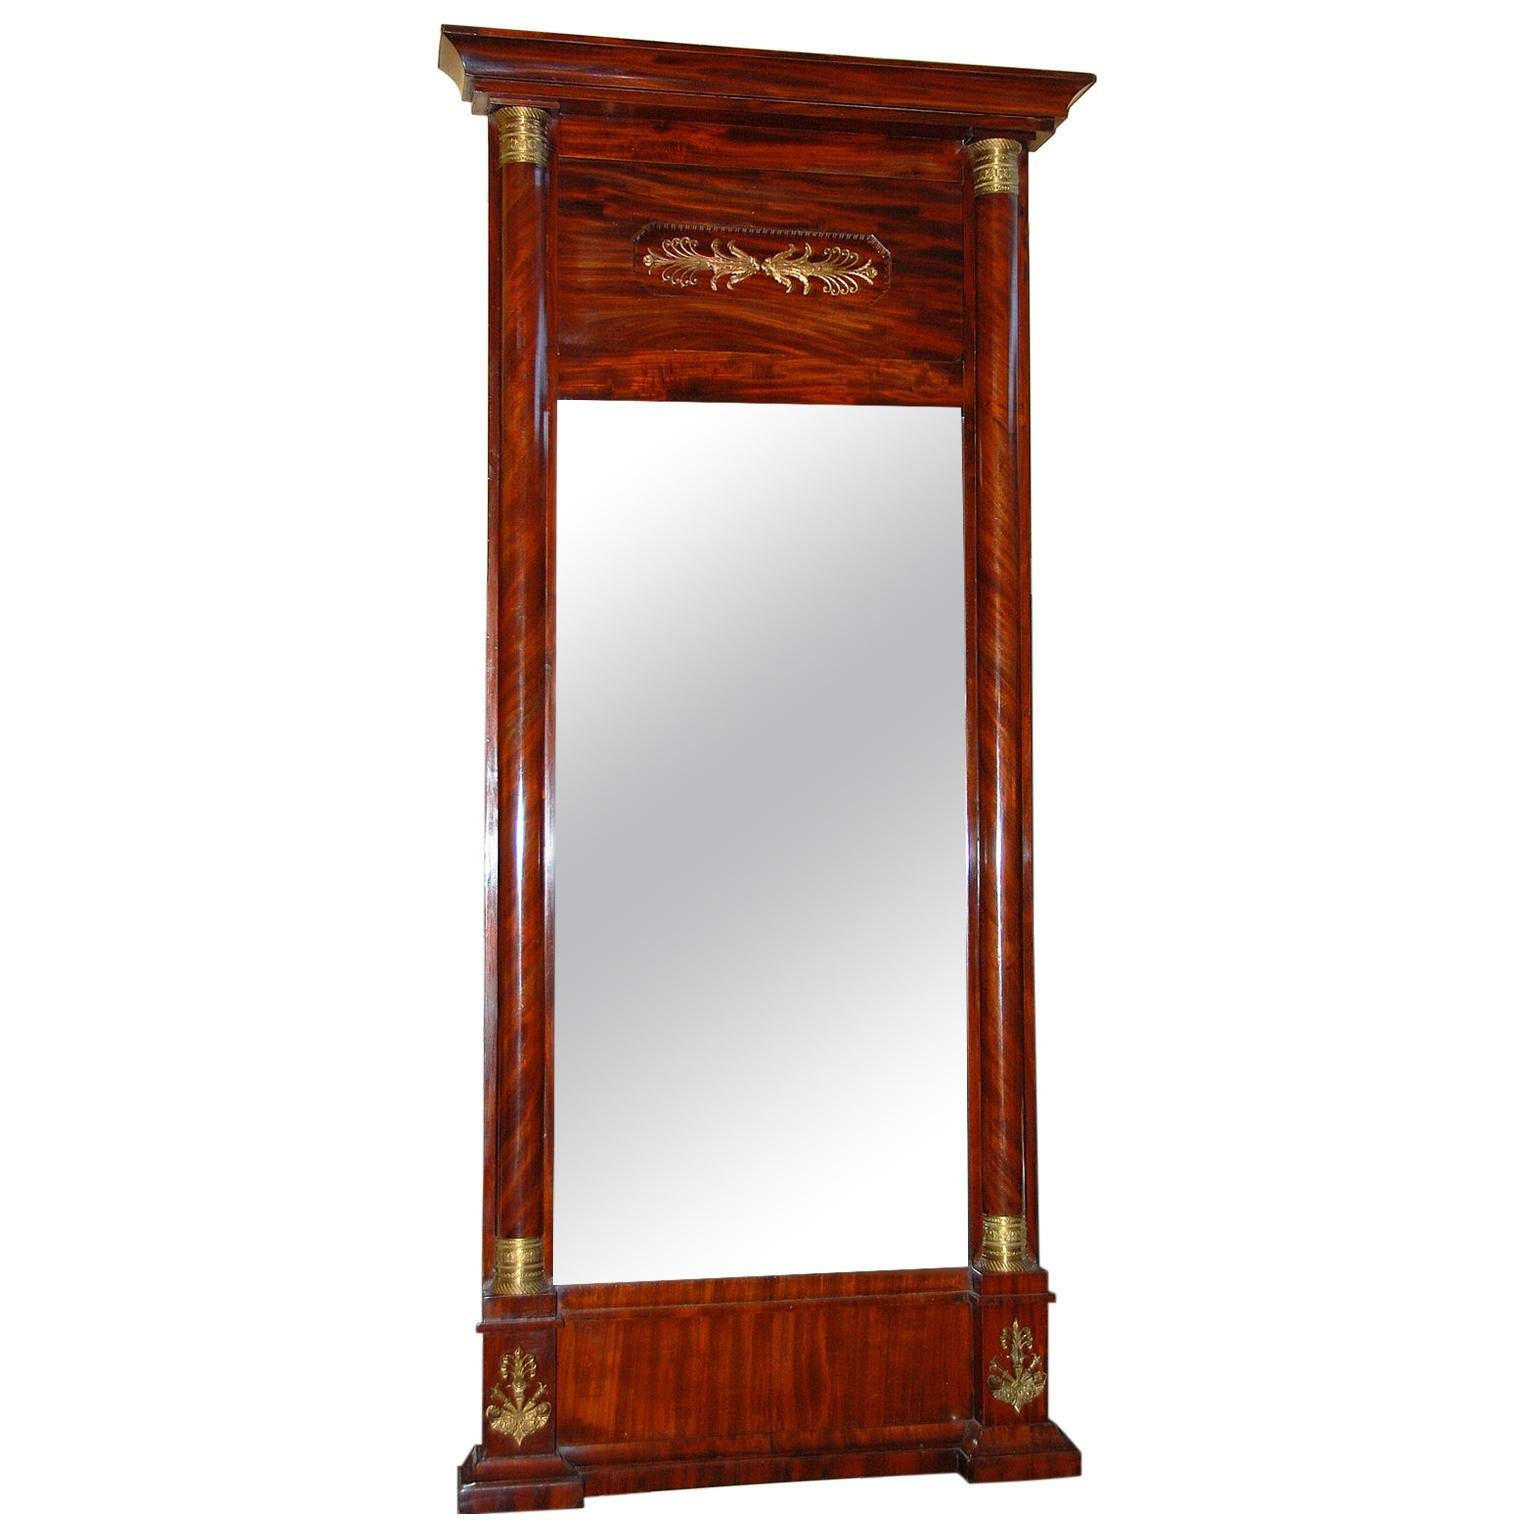 French Empire Period Mahogany Tall Mirror with Ormolu Mounts and Side Columns  For Sale